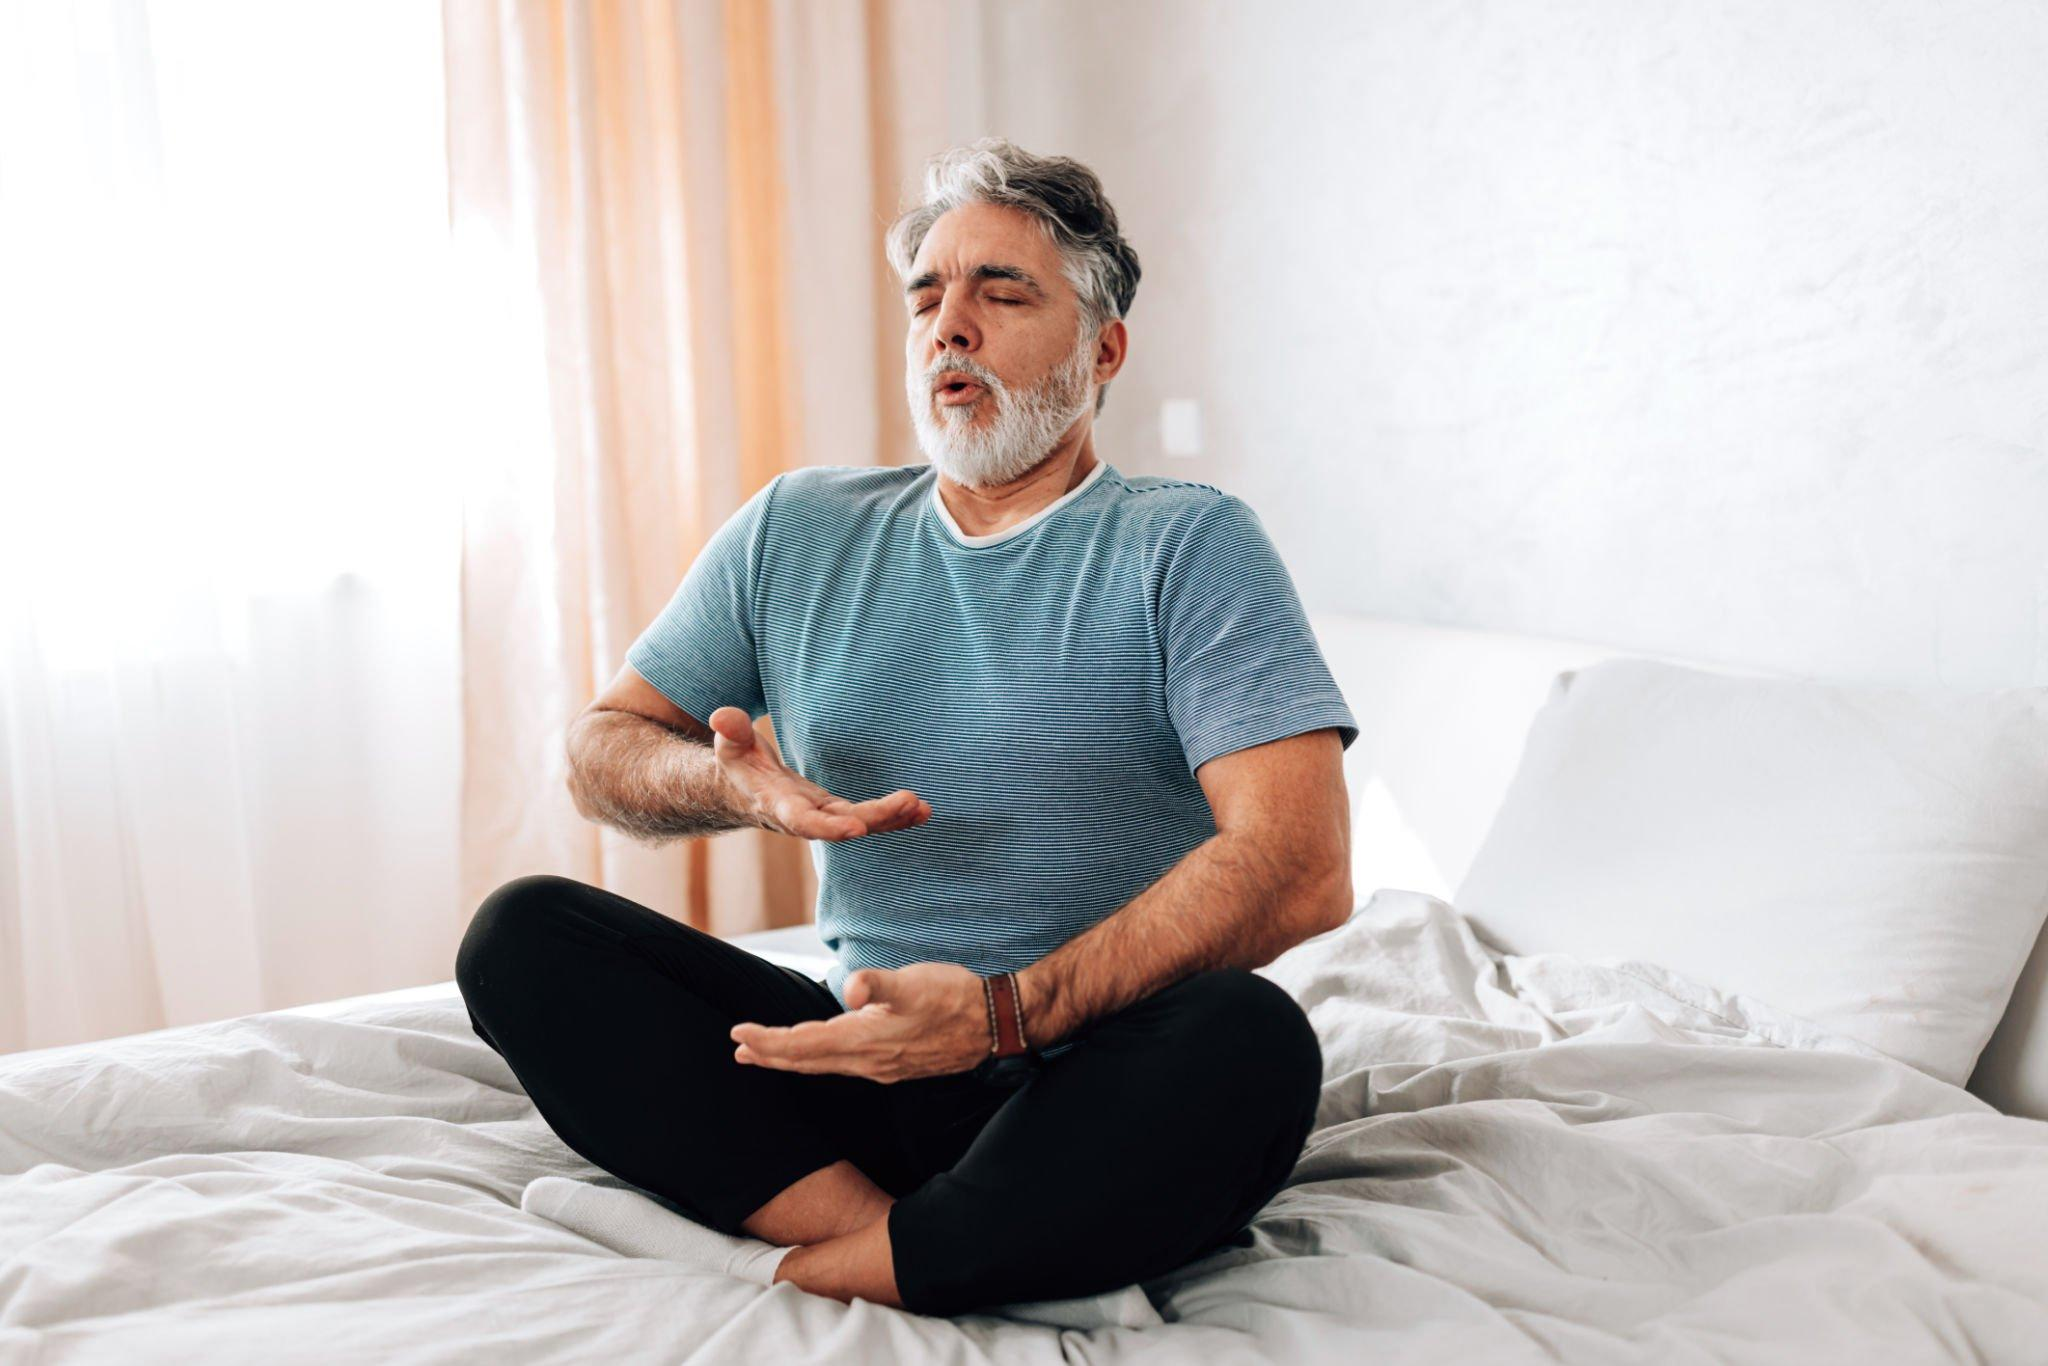 A person deeply engaged in a breathing exercise, demonstrating one of the effective stress management practices to relieve stress and mitigate the potential impacts of stress and diabetes.